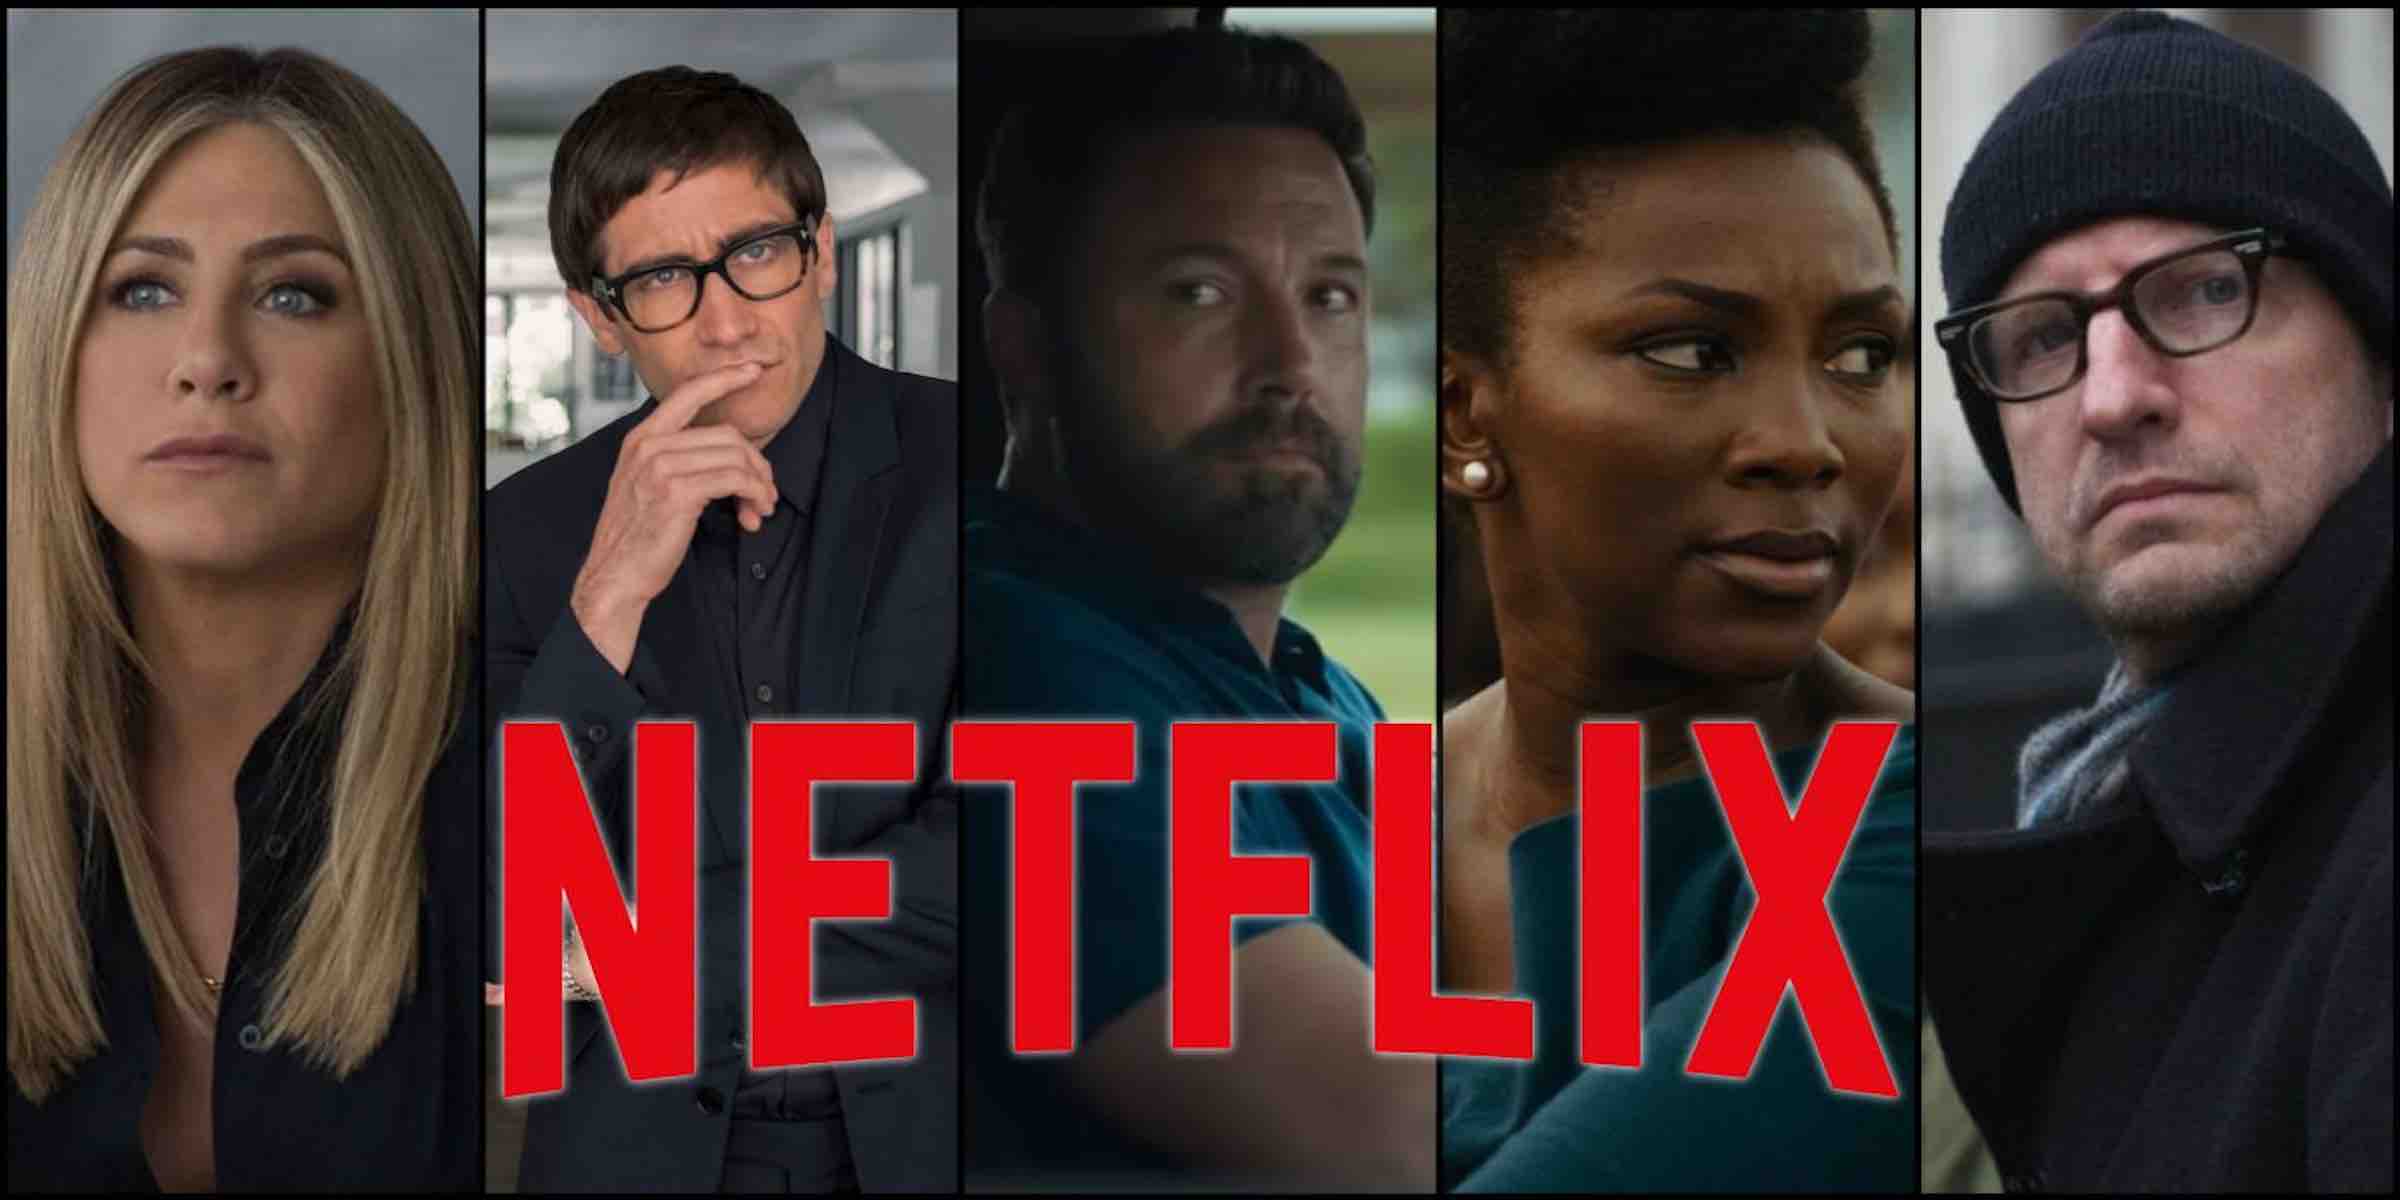 In the age of streaming and overcrowding of great TV, you need to know what bad shows to avoid. It’s time to talk about the worst Netflix Originals.